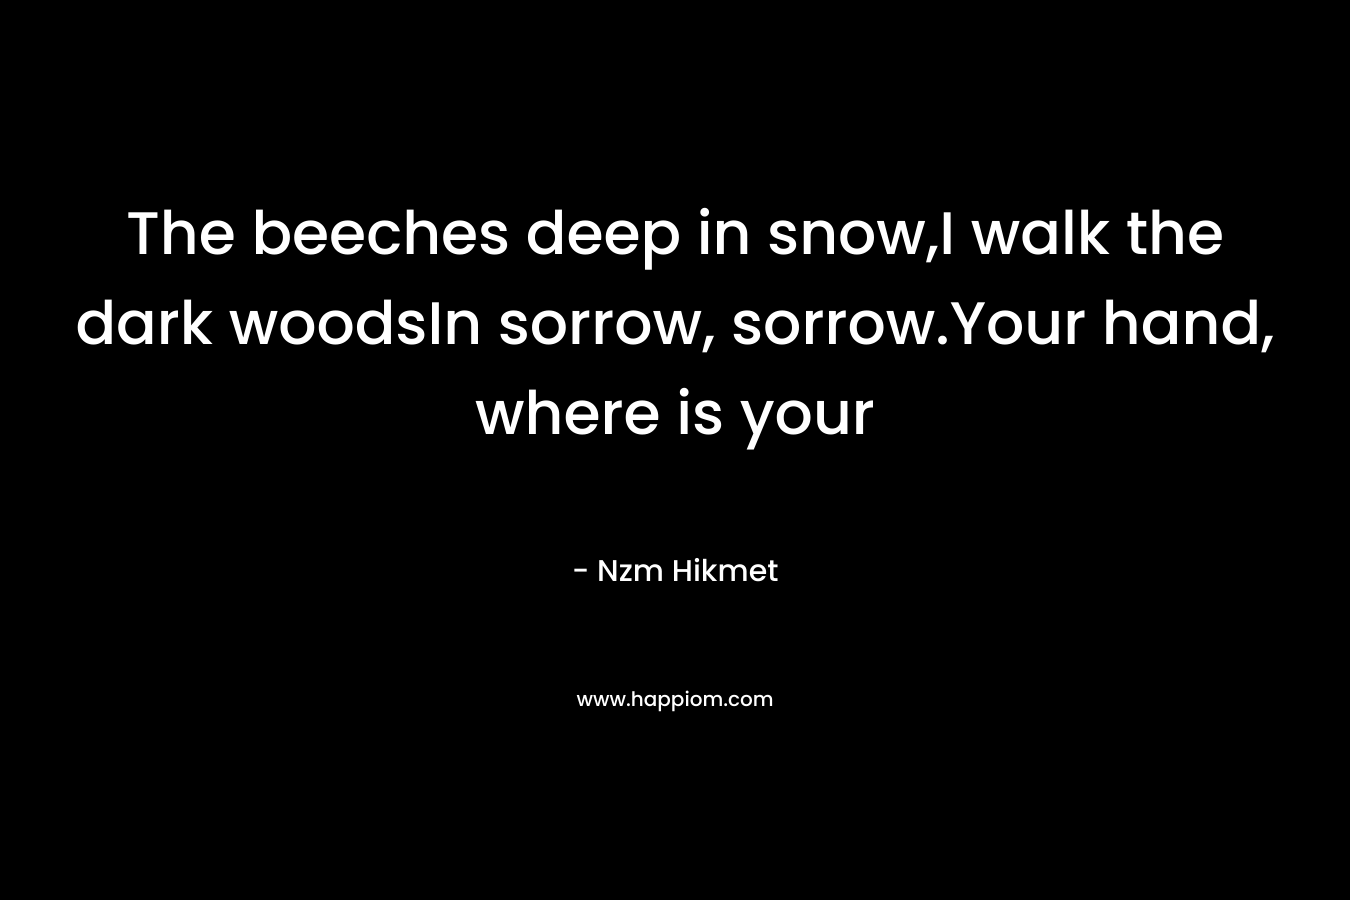 The beeches deep in snow,I walk the dark woodsIn sorrow, sorrow.Your hand, where is your